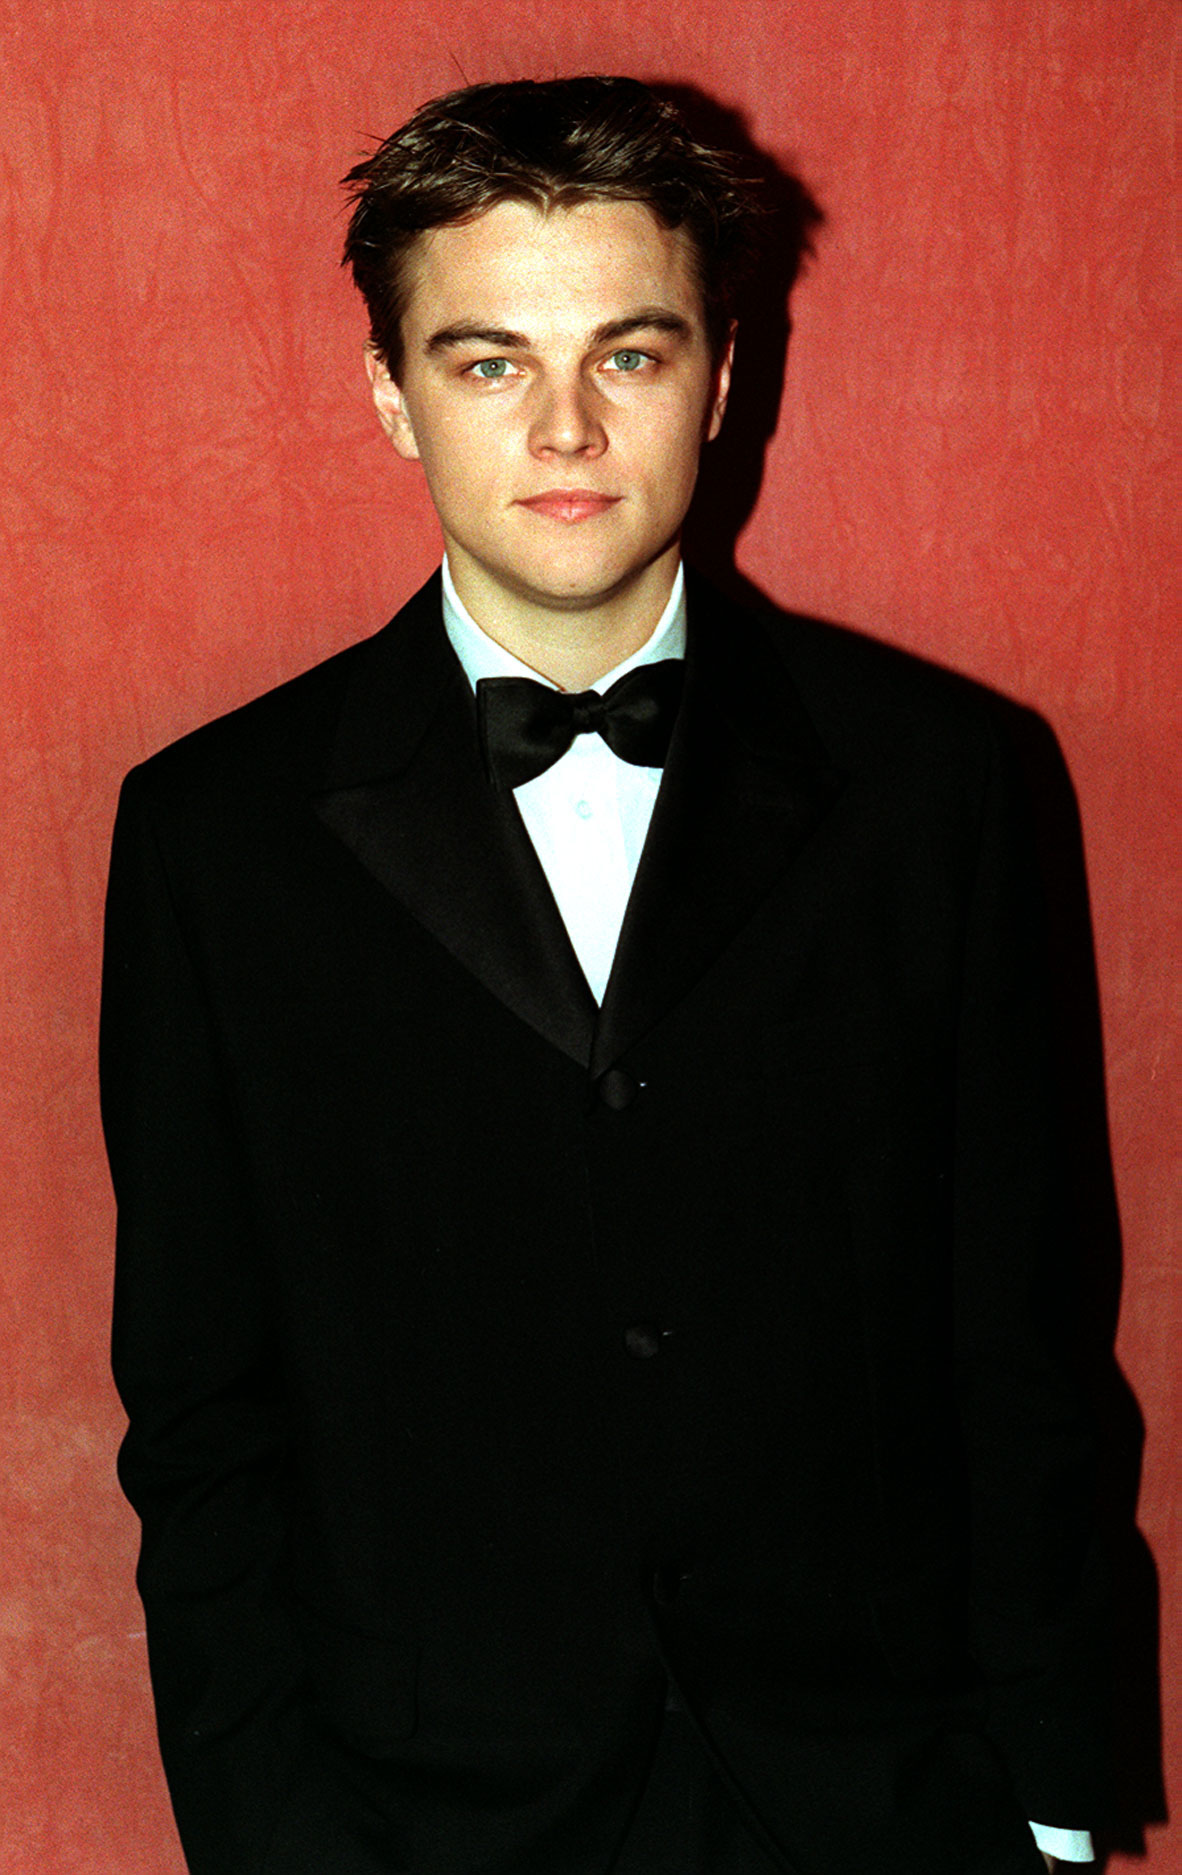 Leonardo DiCaprio photographed on March 19, 1998 | Source: Getty Images